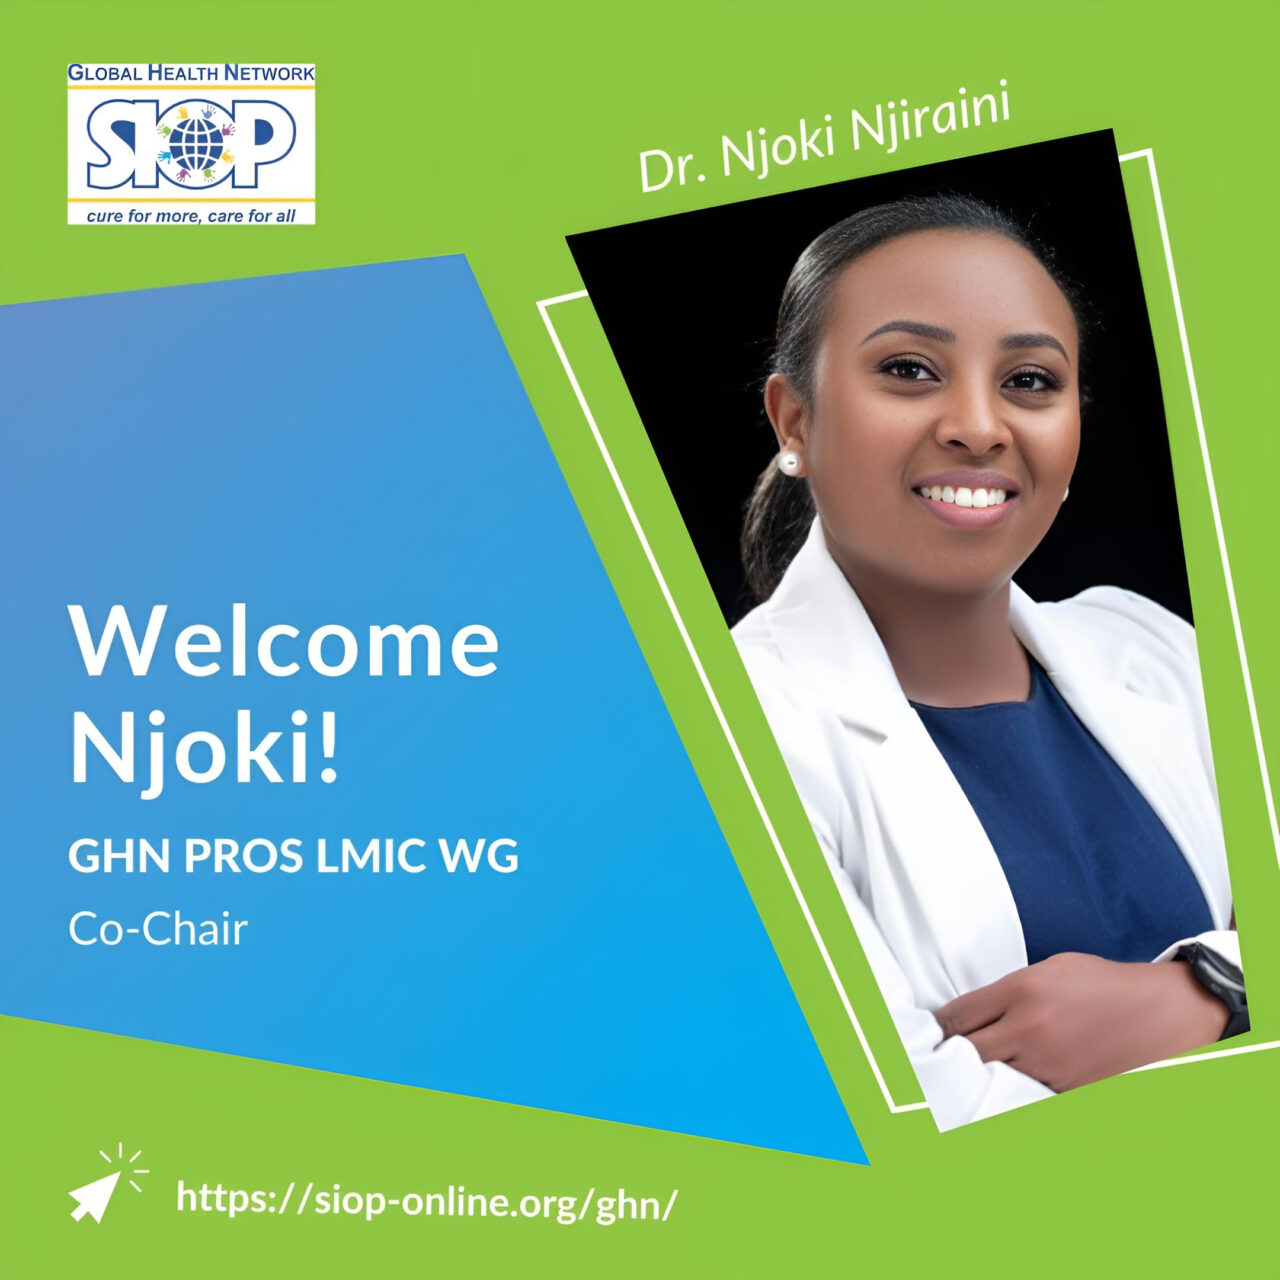 Congratulations to Dr. Njoki Njiraini (Kenya), who has been elected Co-Chair of GHN PROS LMIC Working Group – SIOP